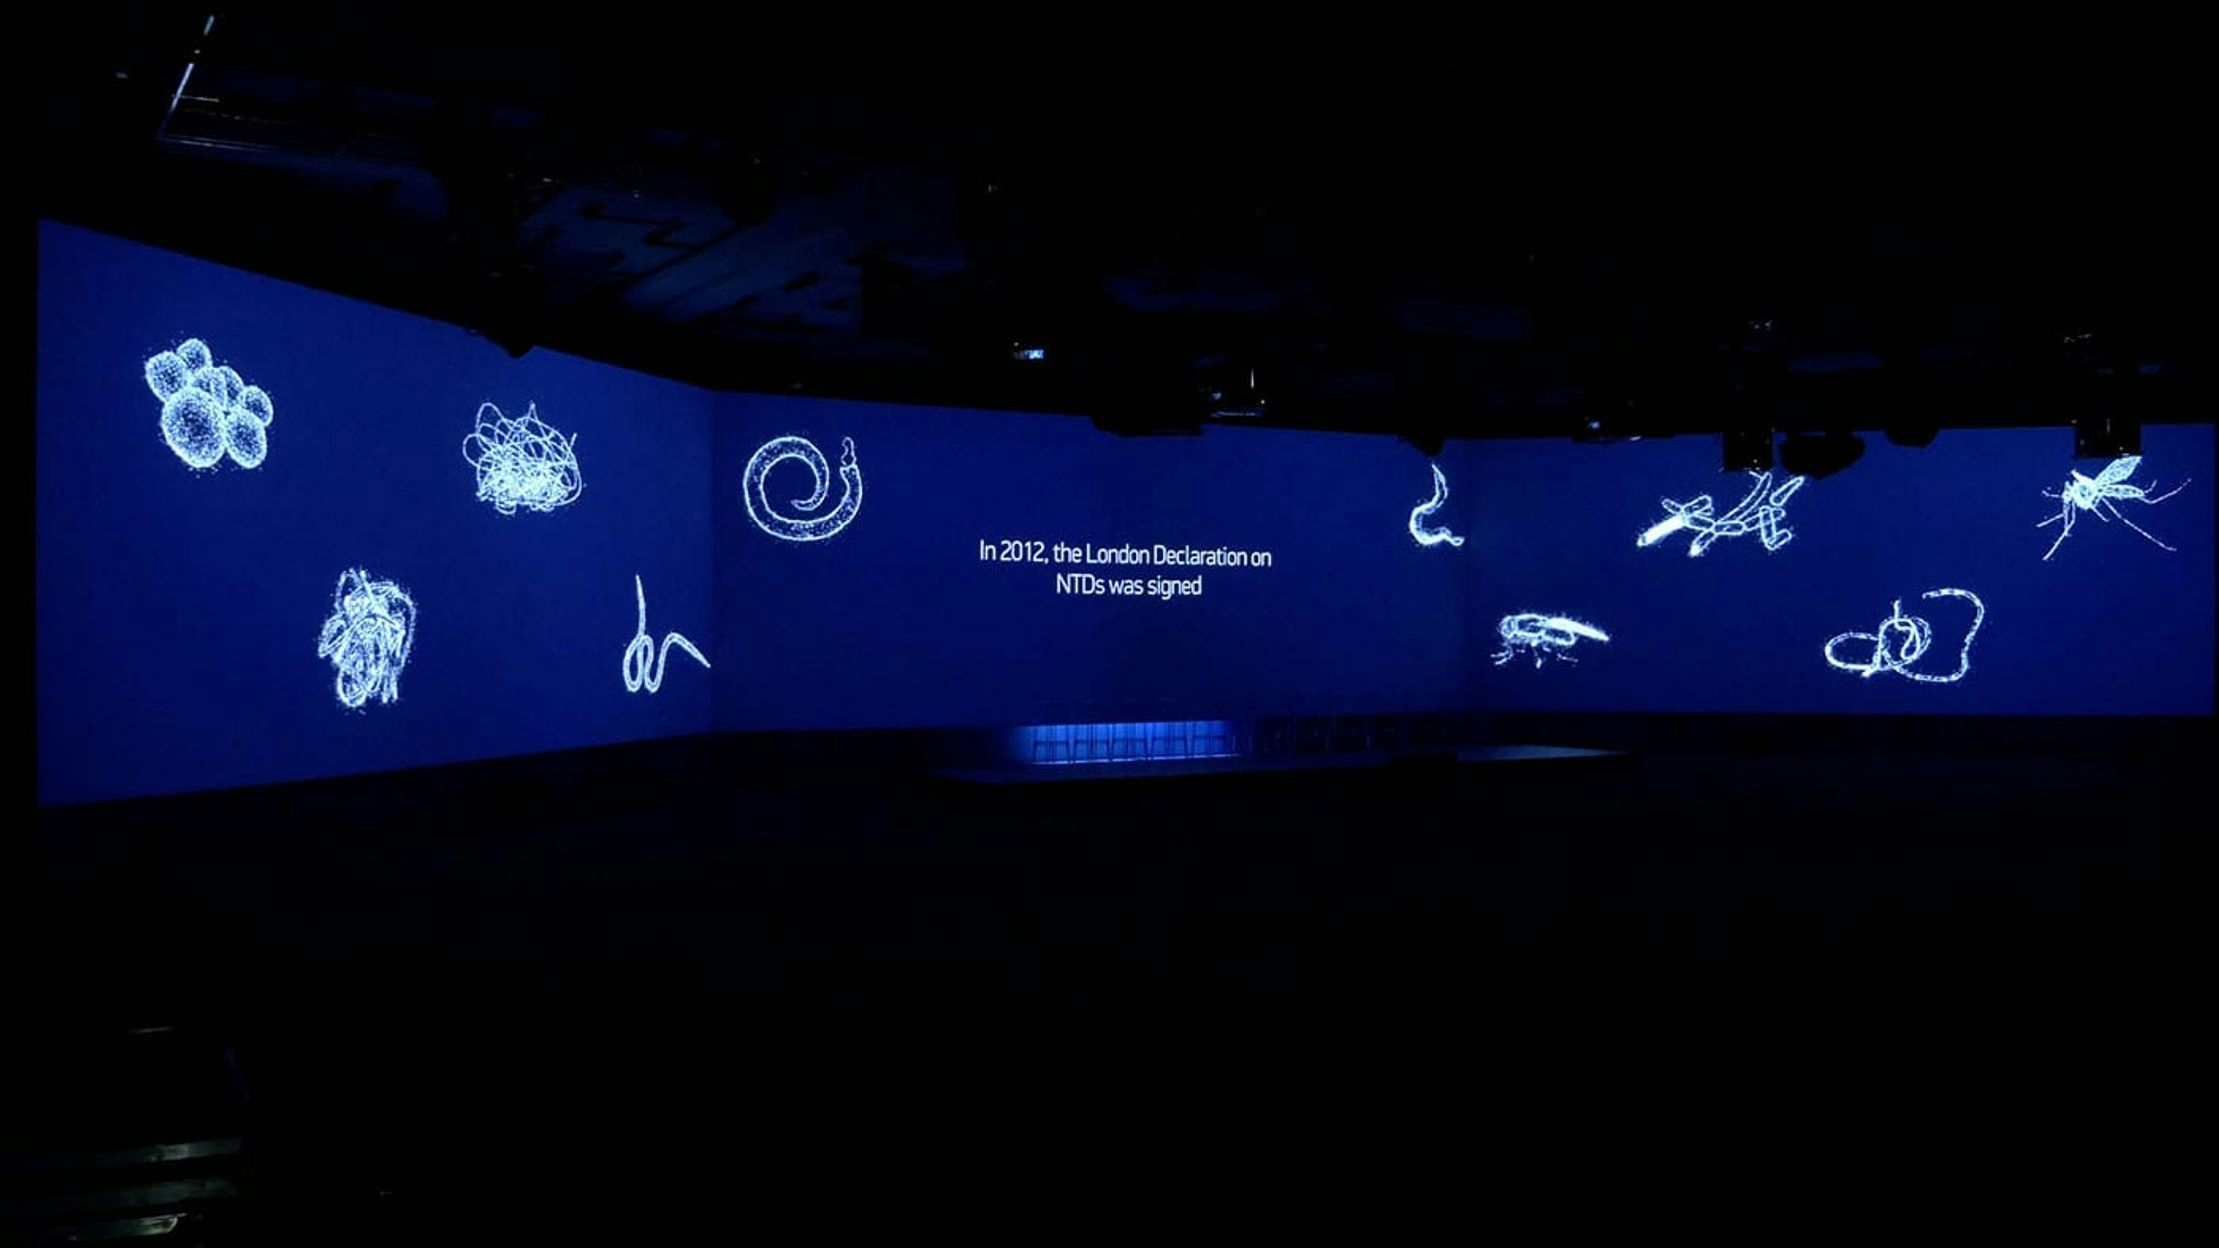 A dark room with three floor to ceiling screens. The screens show various microbes and parasites on a dark blue background. In the middle is the text: "In 2012 the London Declaration on NTDs was signed"